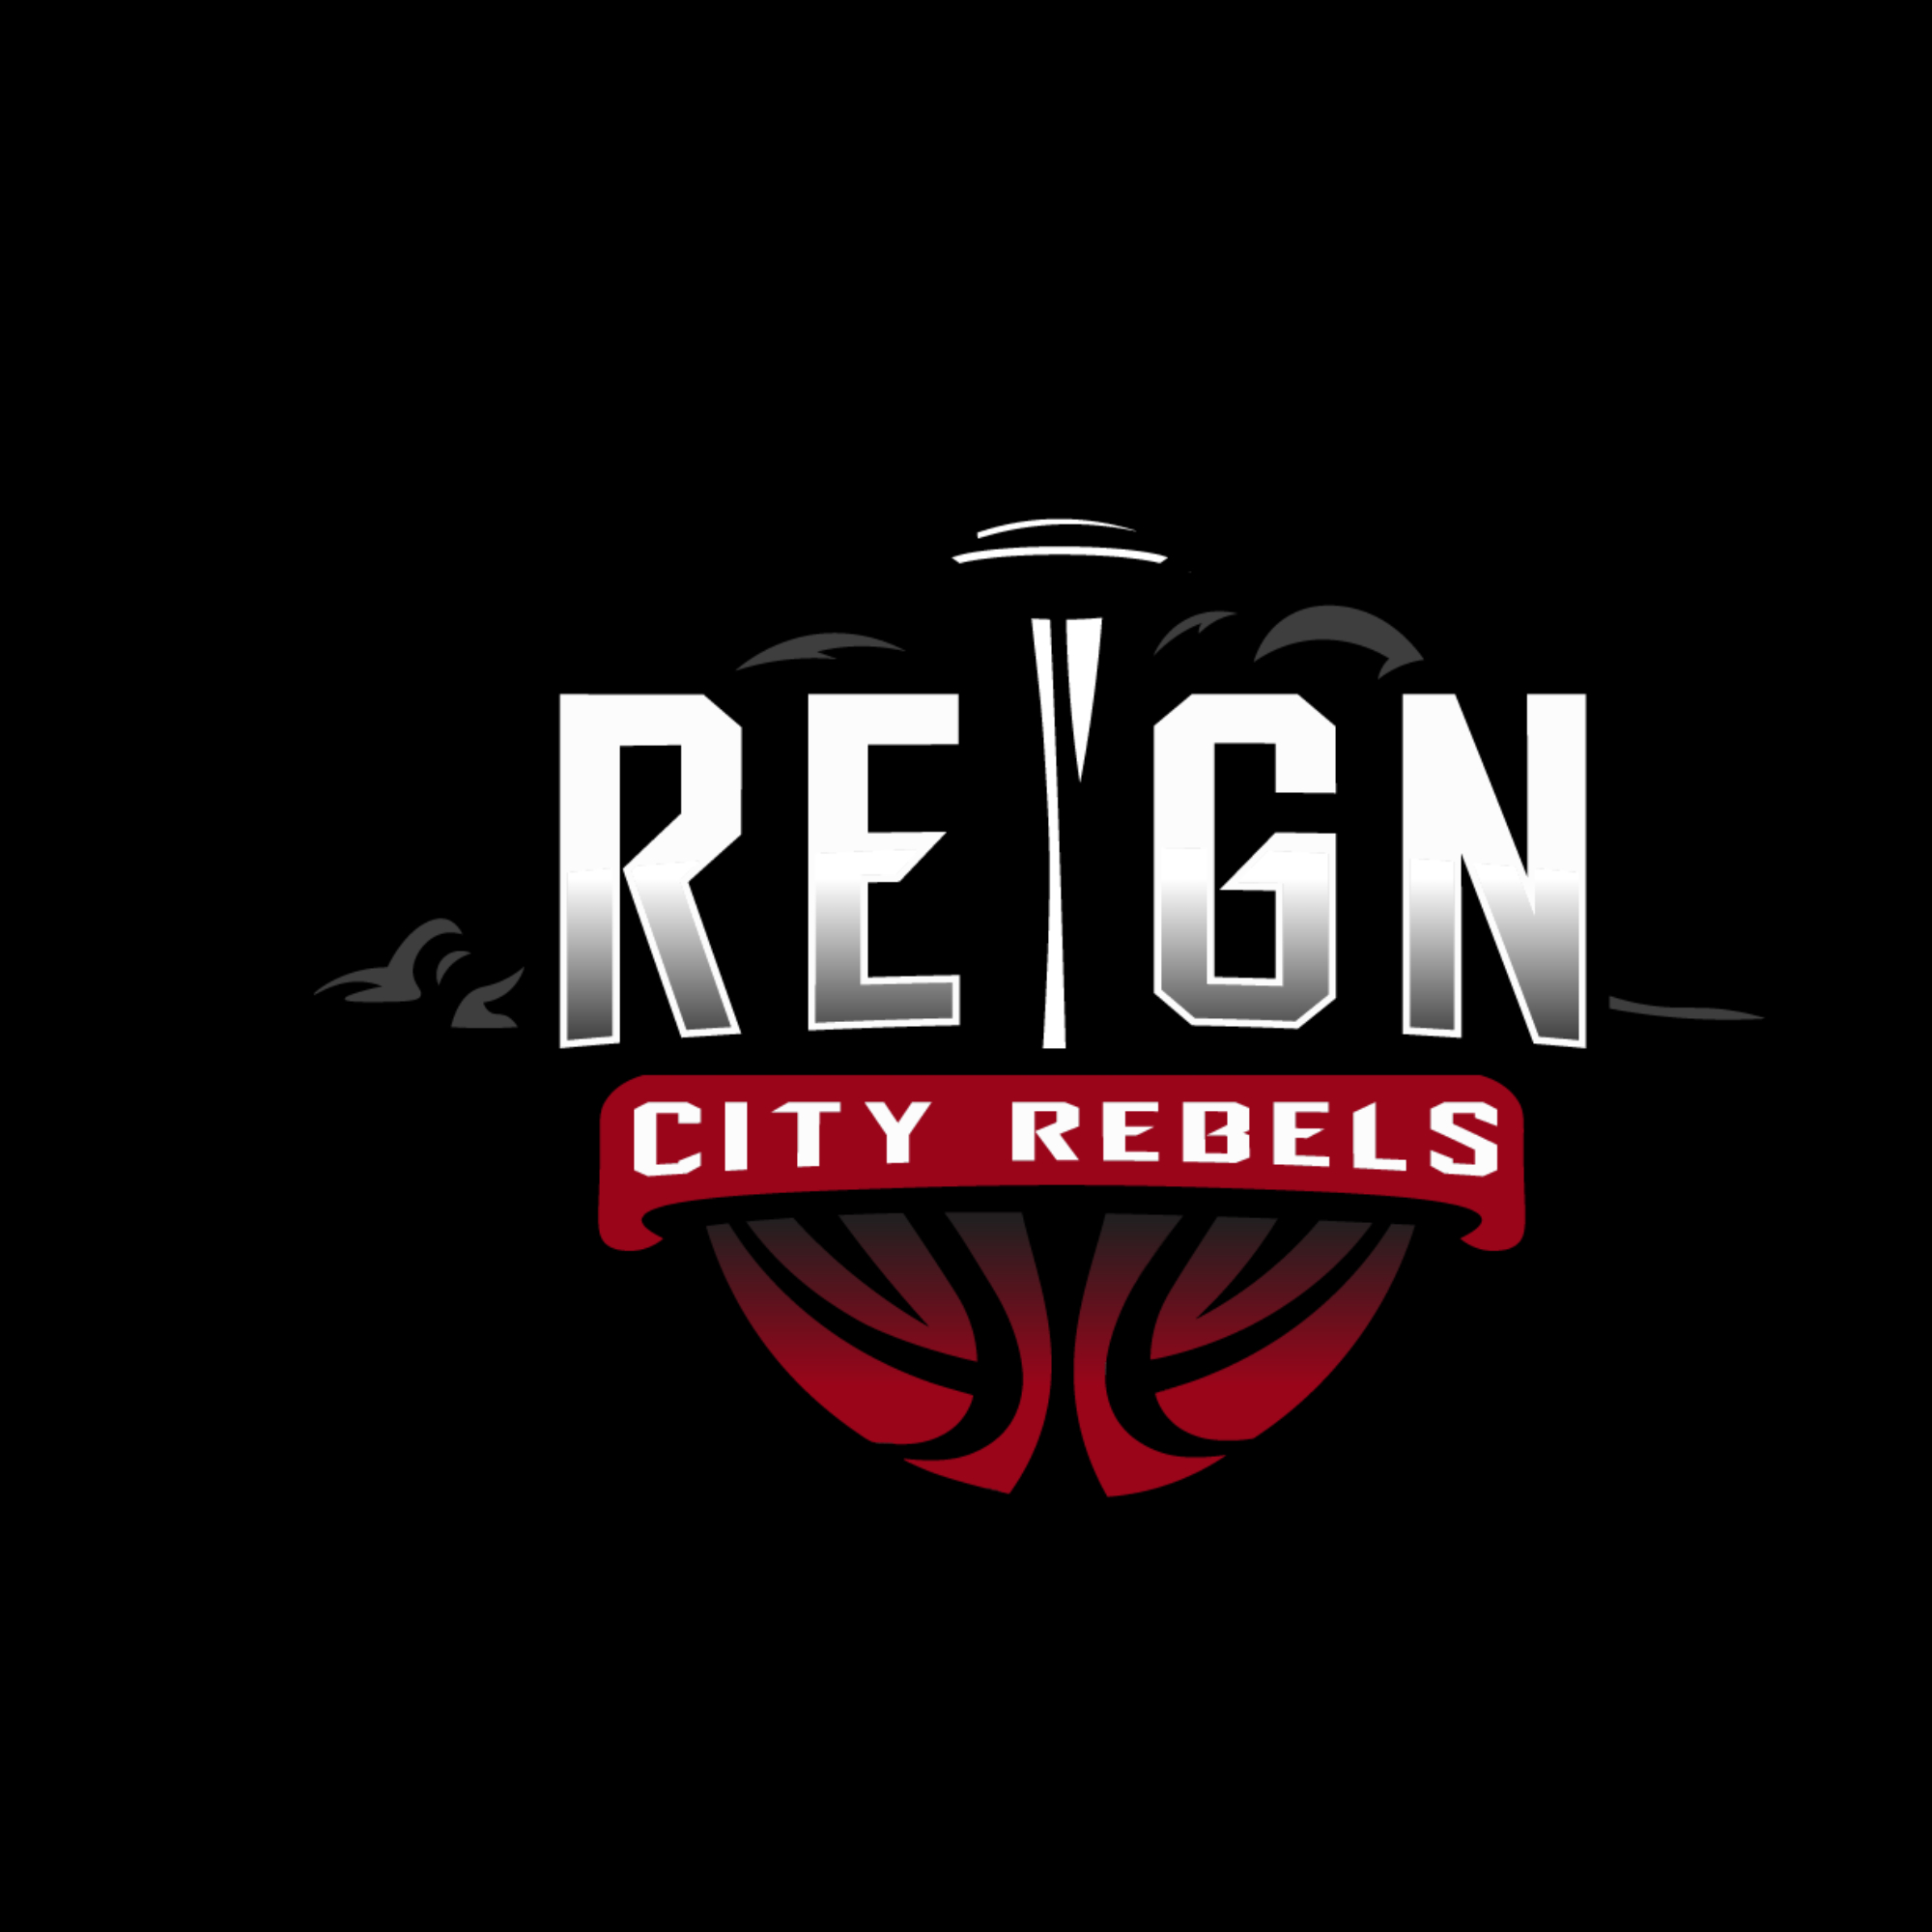 The official logo of Reign City Rebels